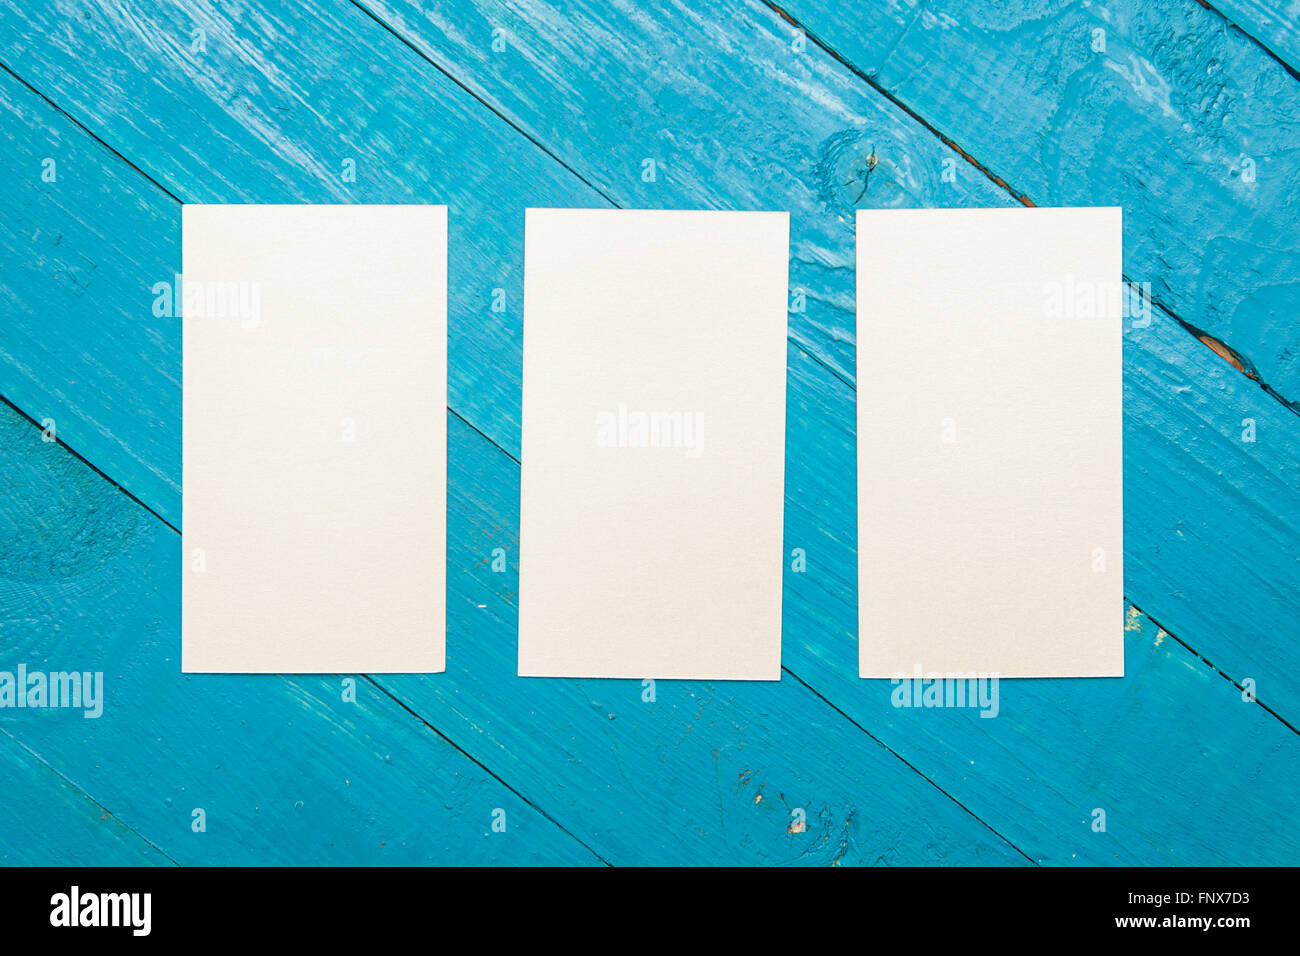 Business card on a blue wooden background. Mock-up for branding Stock Photo